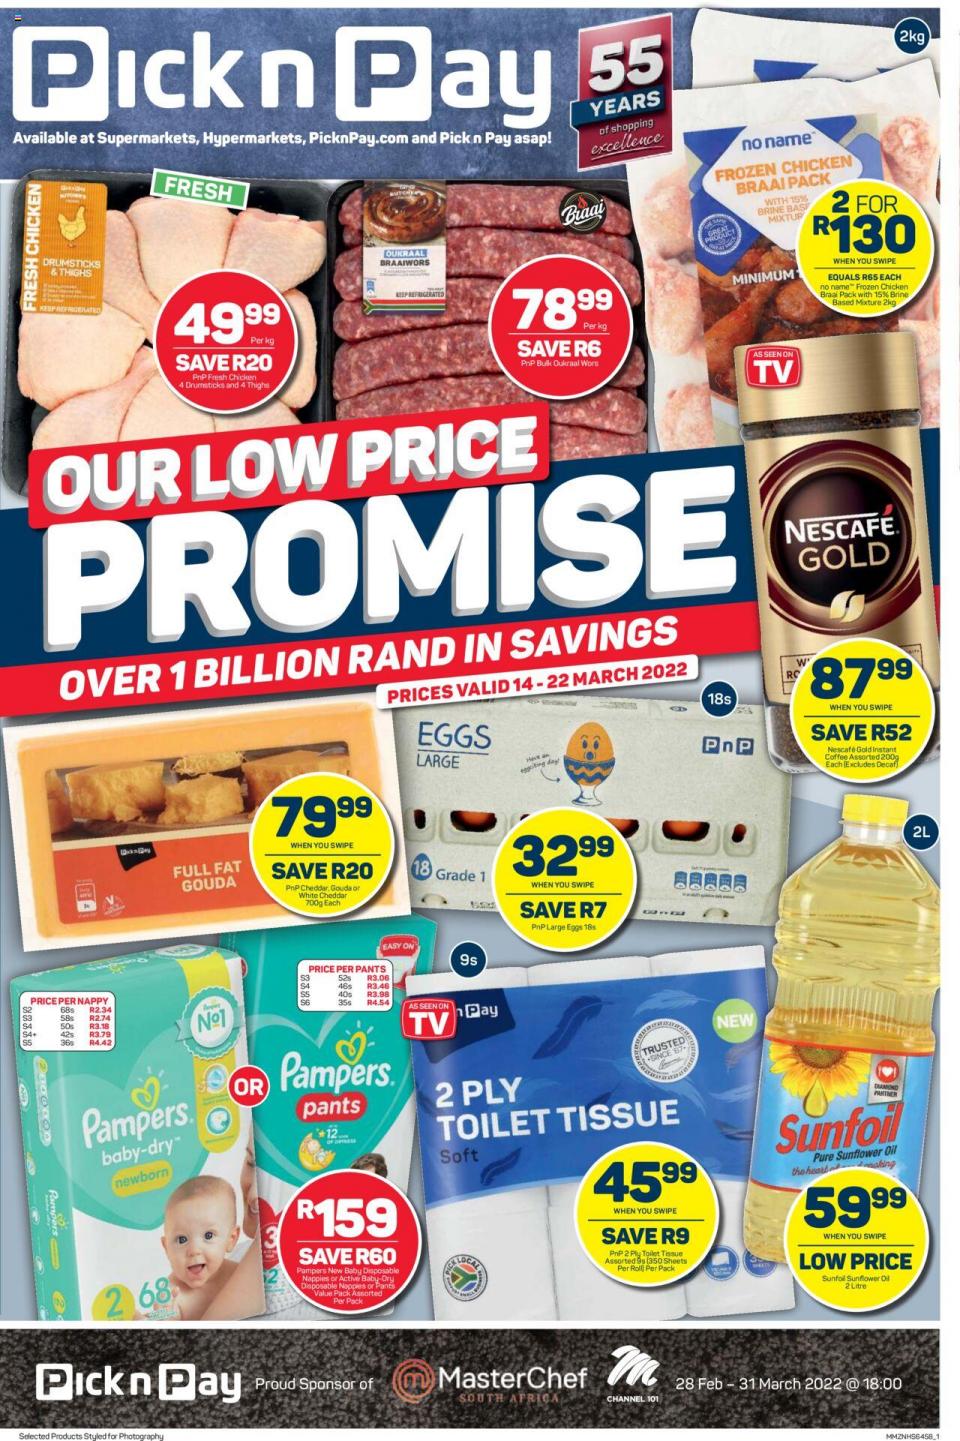 Pick n Pay Specials 14 – 22 March 2022